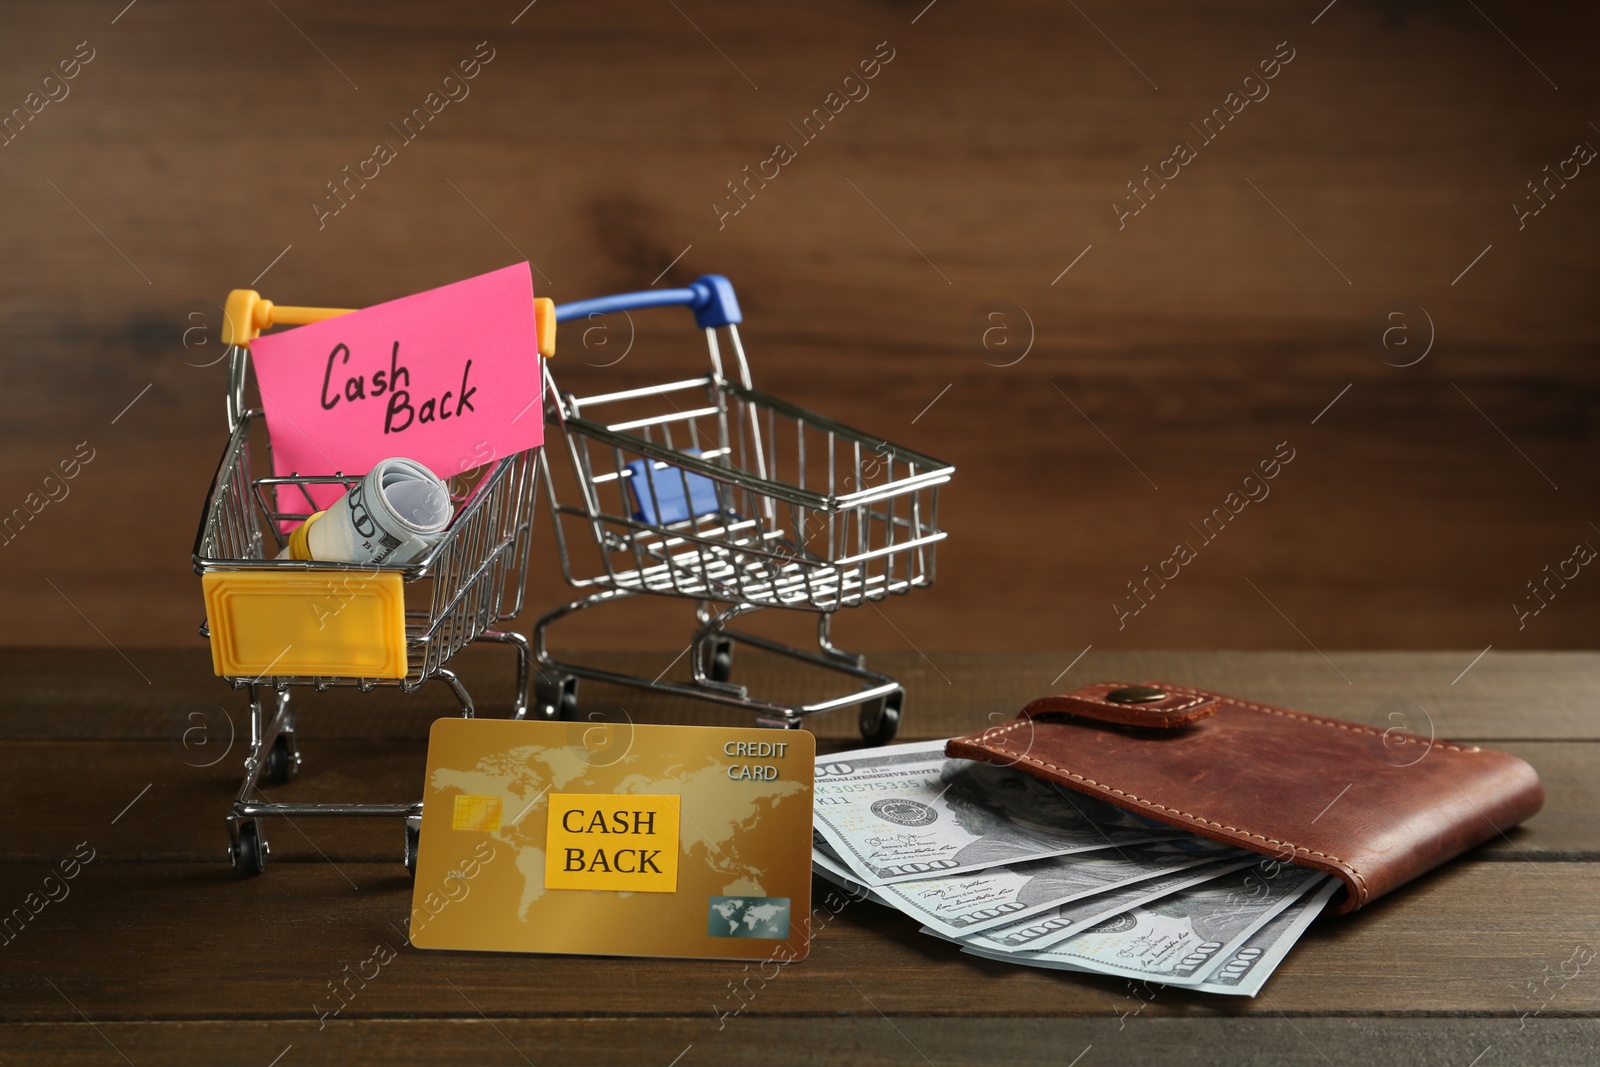 Photo of Composition with signs Cash Back, credit card and small shopping carts on wooden table